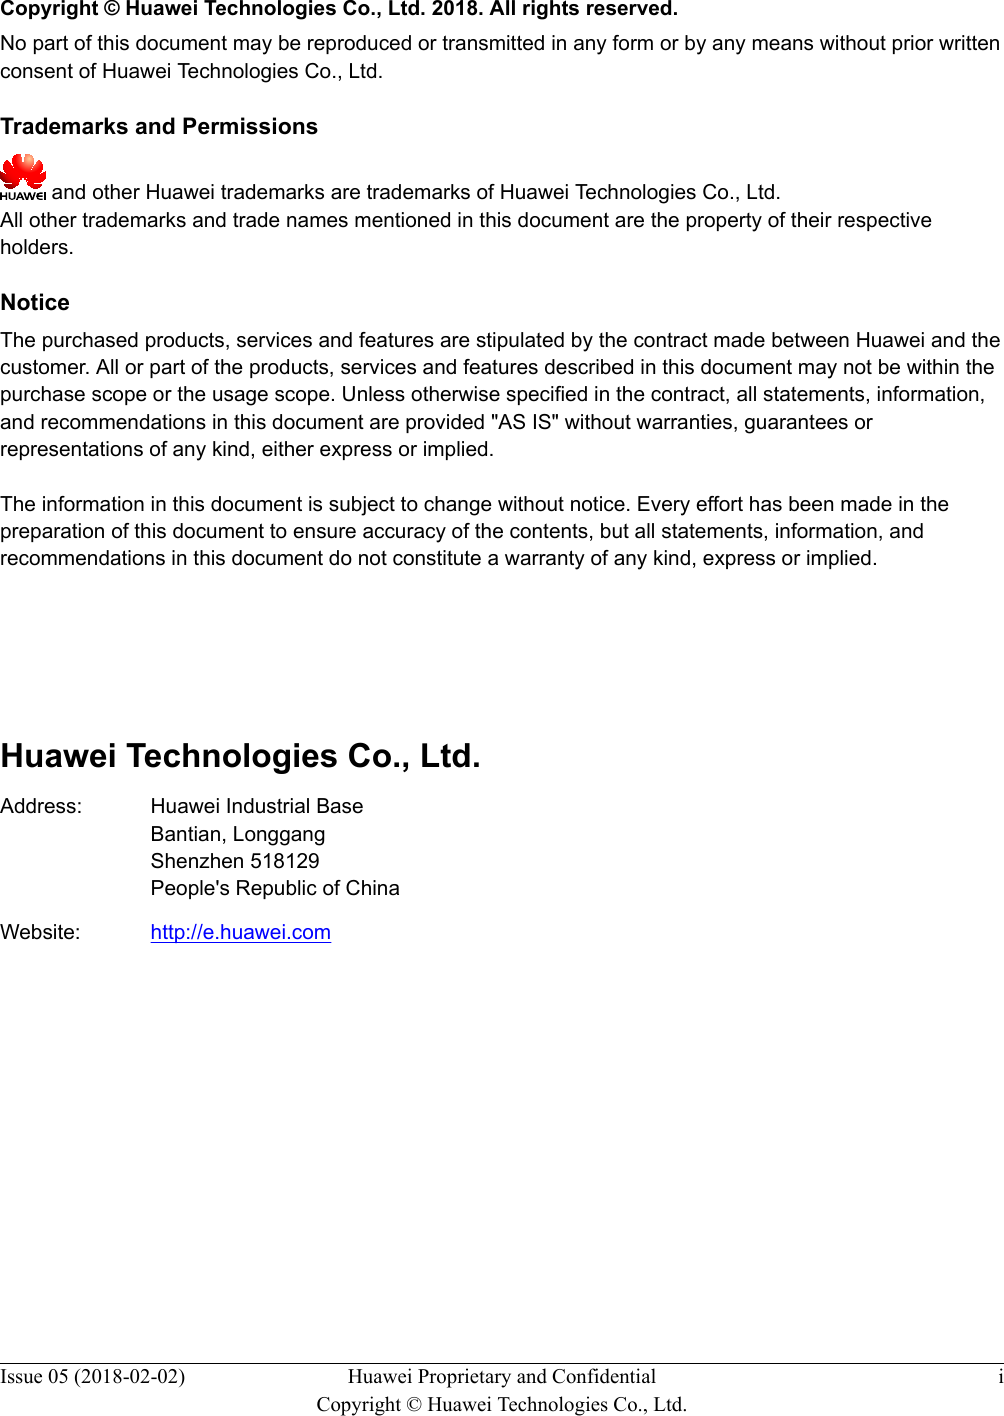   Copyright © Huawei Technologies Co., Ltd. 2018. All rights reserved.No part of this document may be reproduced or transmitted in any form or by any means without prior writtenconsent of Huawei Technologies Co., Ltd. Trademarks and Permissions and other Huawei trademarks are trademarks of Huawei Technologies Co., Ltd.All other trademarks and trade names mentioned in this document are the property of their respectiveholders. NoticeThe purchased products, services and features are stipulated by the contract made between Huawei and thecustomer. All or part of the products, services and features described in this document may not be within thepurchase scope or the usage scope. Unless otherwise specified in the contract, all statements, information,and recommendations in this document are provided &quot;AS IS&quot; without warranties, guarantees orrepresentations of any kind, either express or implied.The information in this document is subject to change without notice. Every effort has been made in thepreparation of this document to ensure accuracy of the contents, but all statements, information, andrecommendations in this document do not constitute a warranty of any kind, express or implied.        Huawei Technologies Co., Ltd.Address: Huawei Industrial BaseBantian, LonggangShenzhen 518129People&apos;s Republic of ChinaWebsite: http://e.huawei.comIssue 05 (2018-02-02) Huawei Proprietary and ConfidentialCopyright © Huawei Technologies Co., Ltd.i